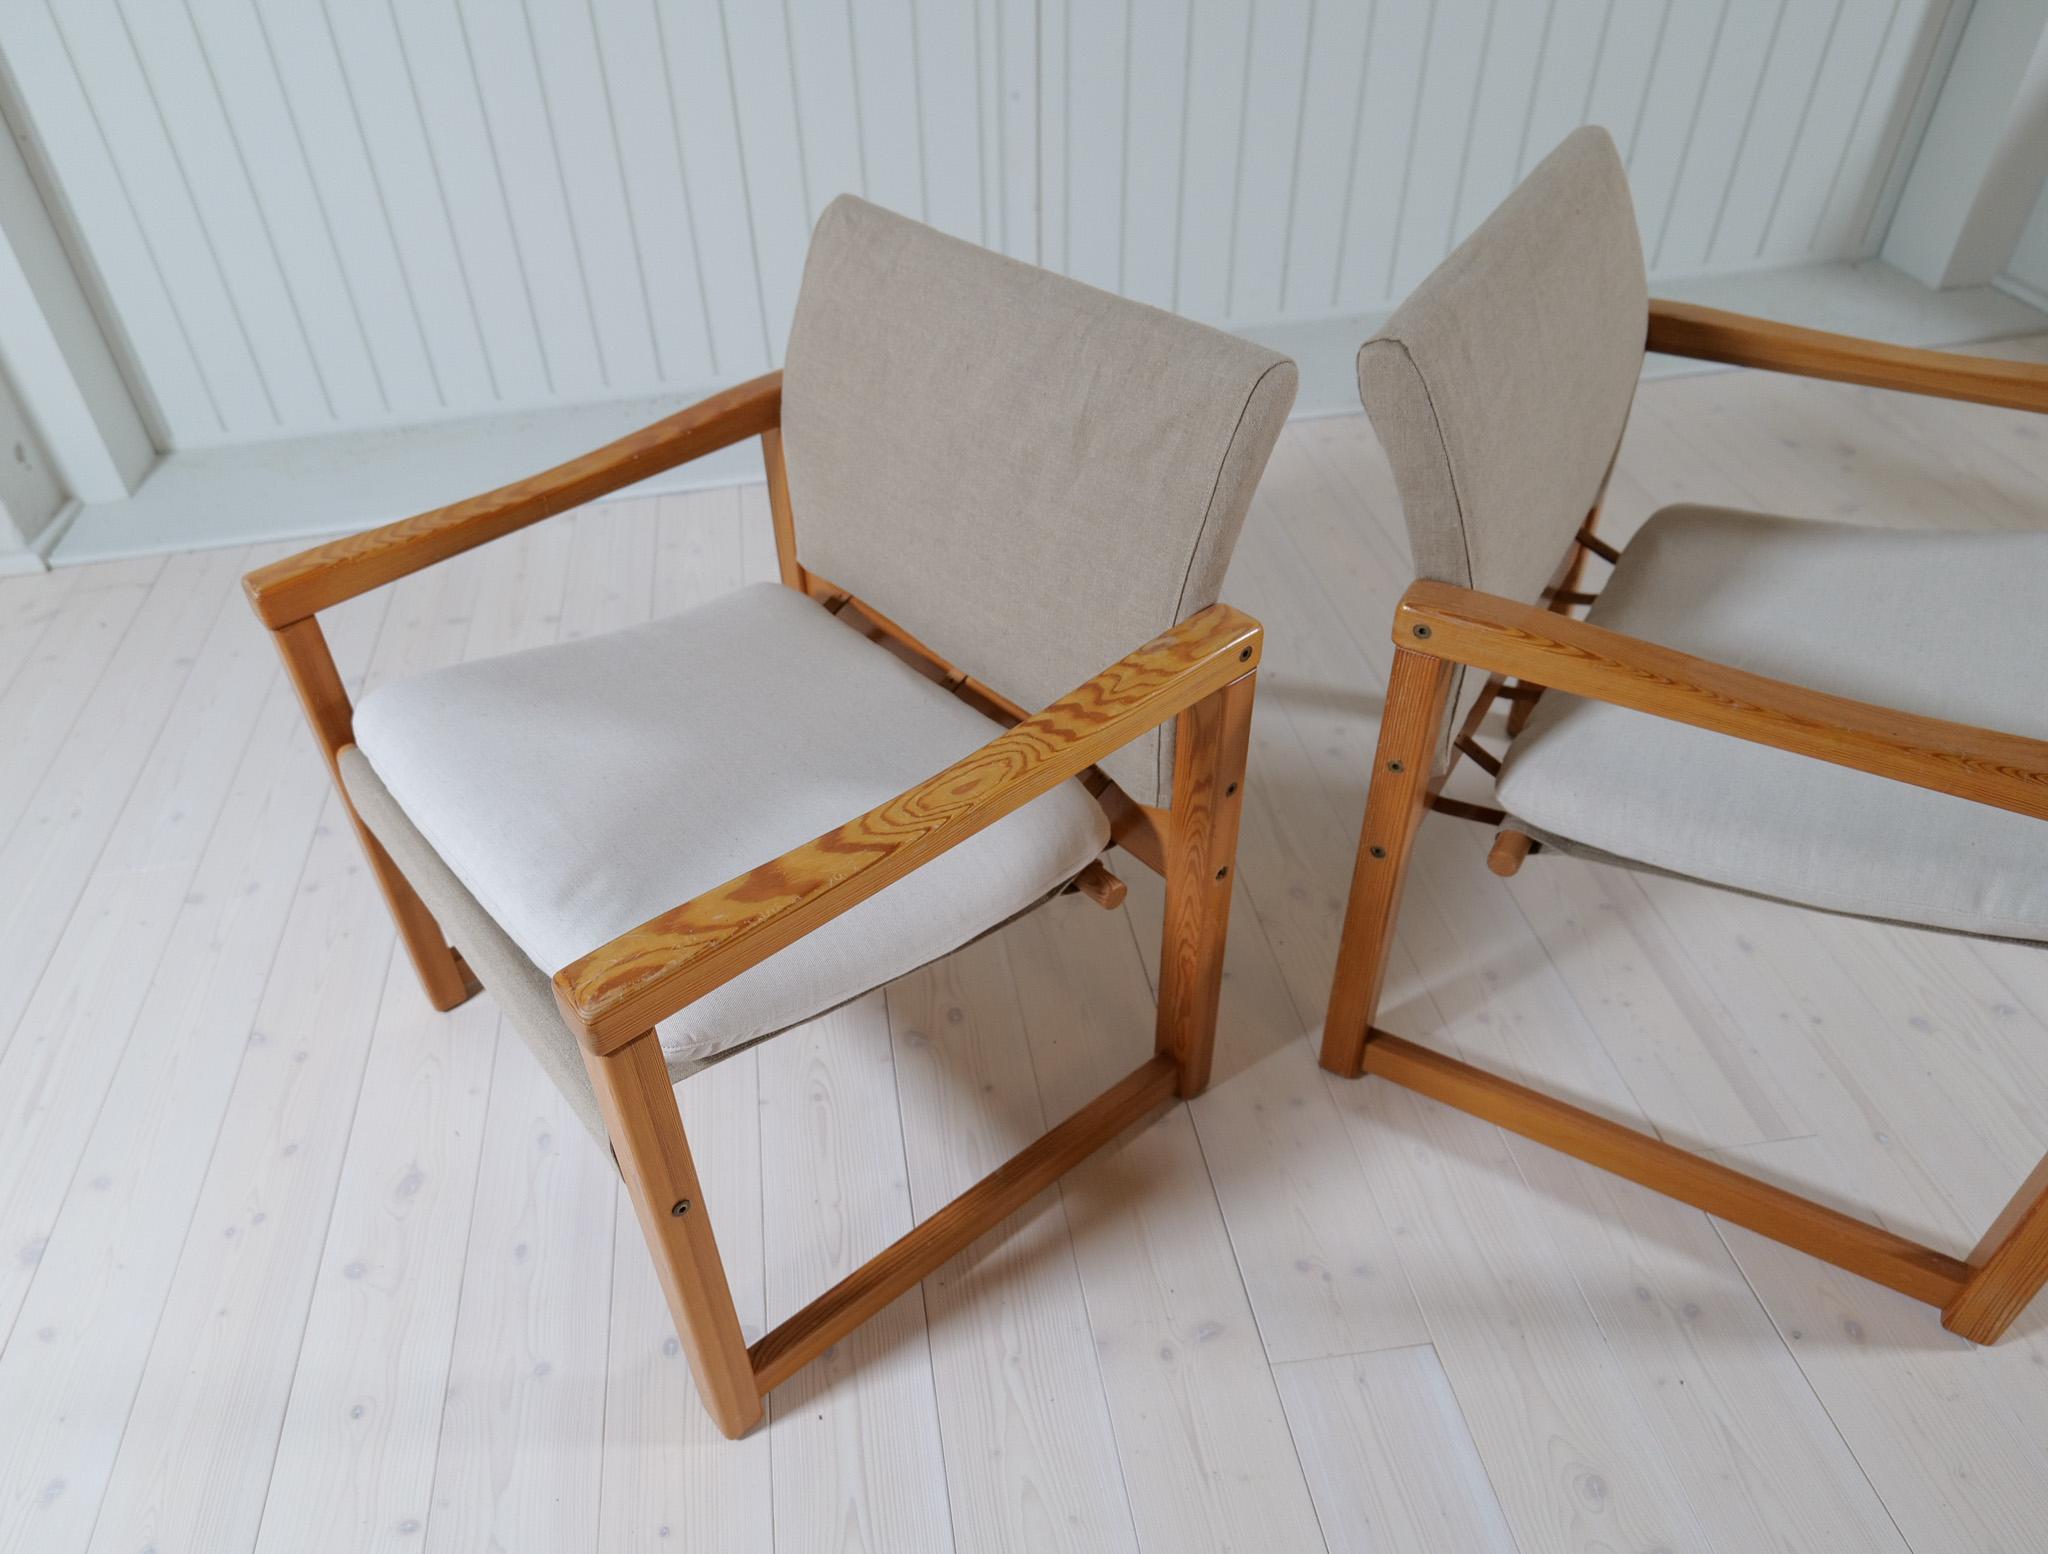 Linen Midcentury Modern Karin Mobring Armchairs Model Diana by Ikea in Sweden, 1970s For Sale